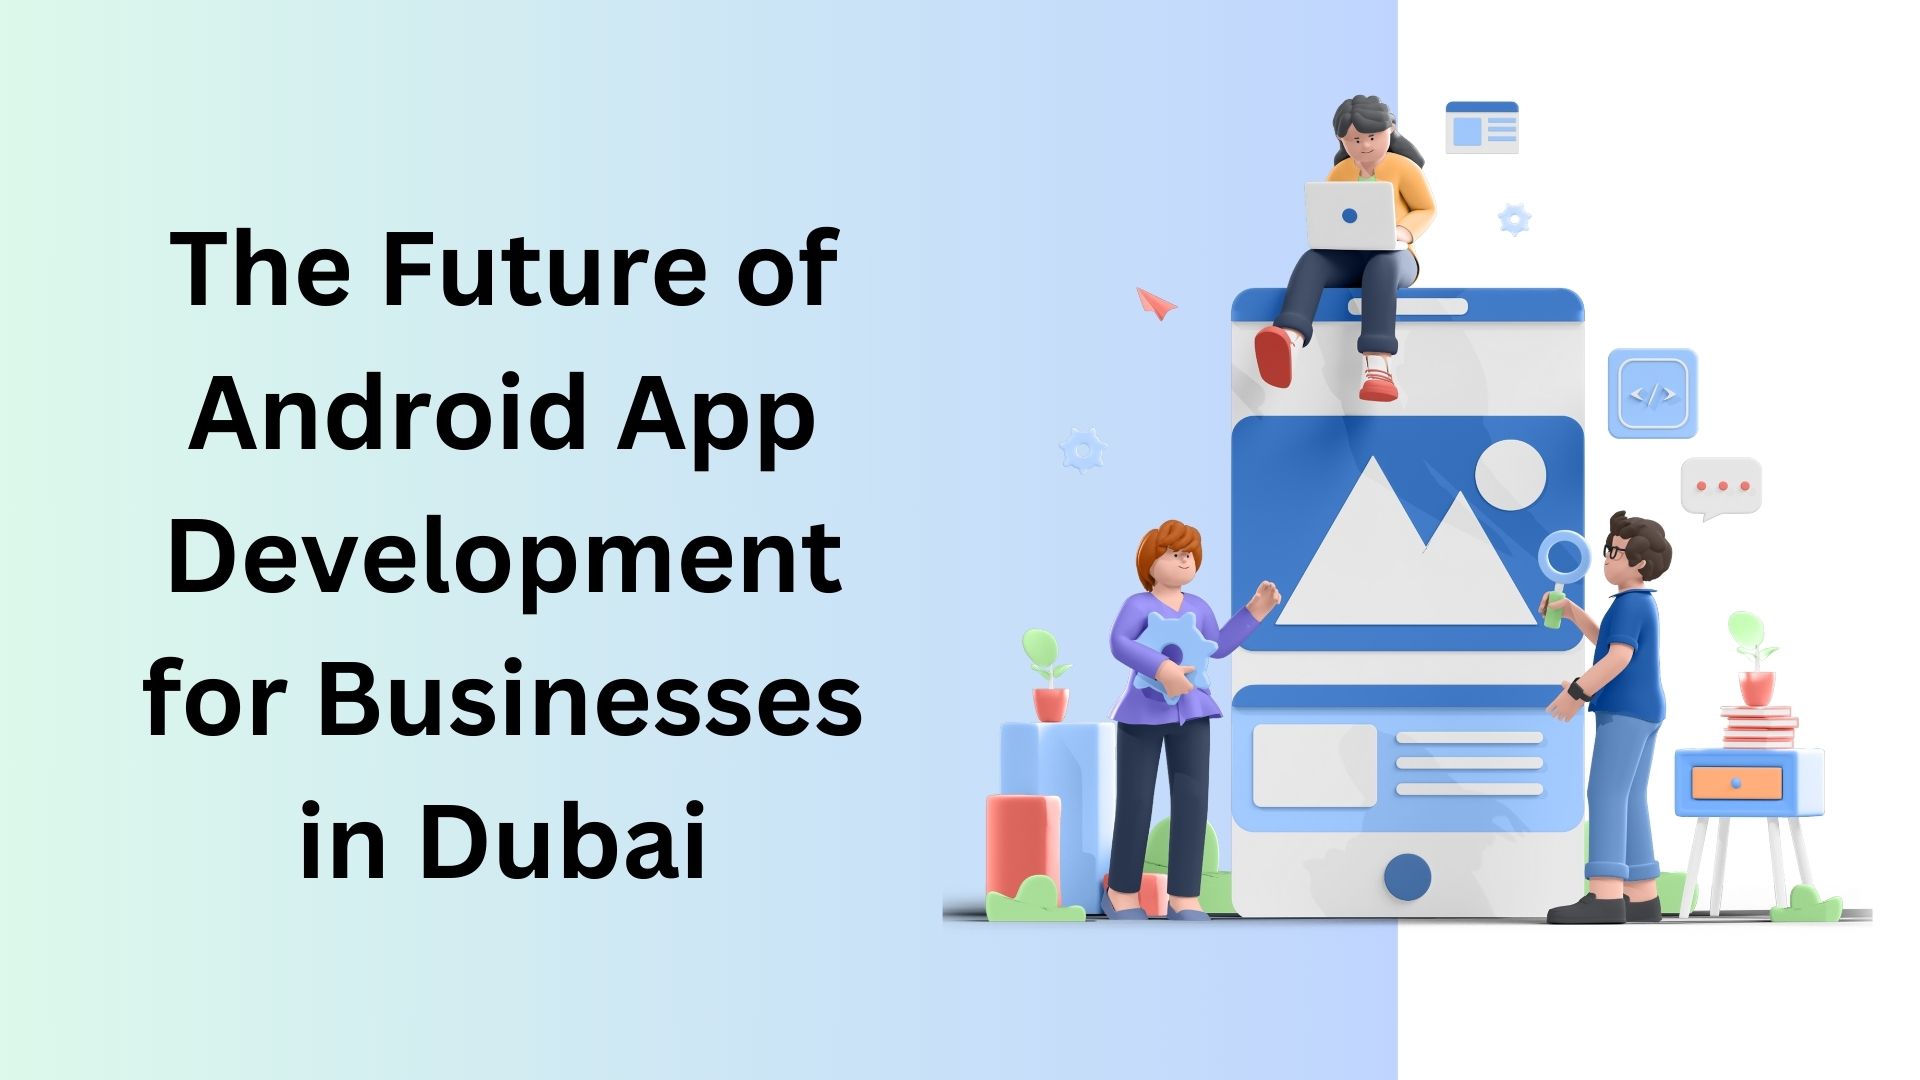 The Future of Android App Development for Businesses in Dubai